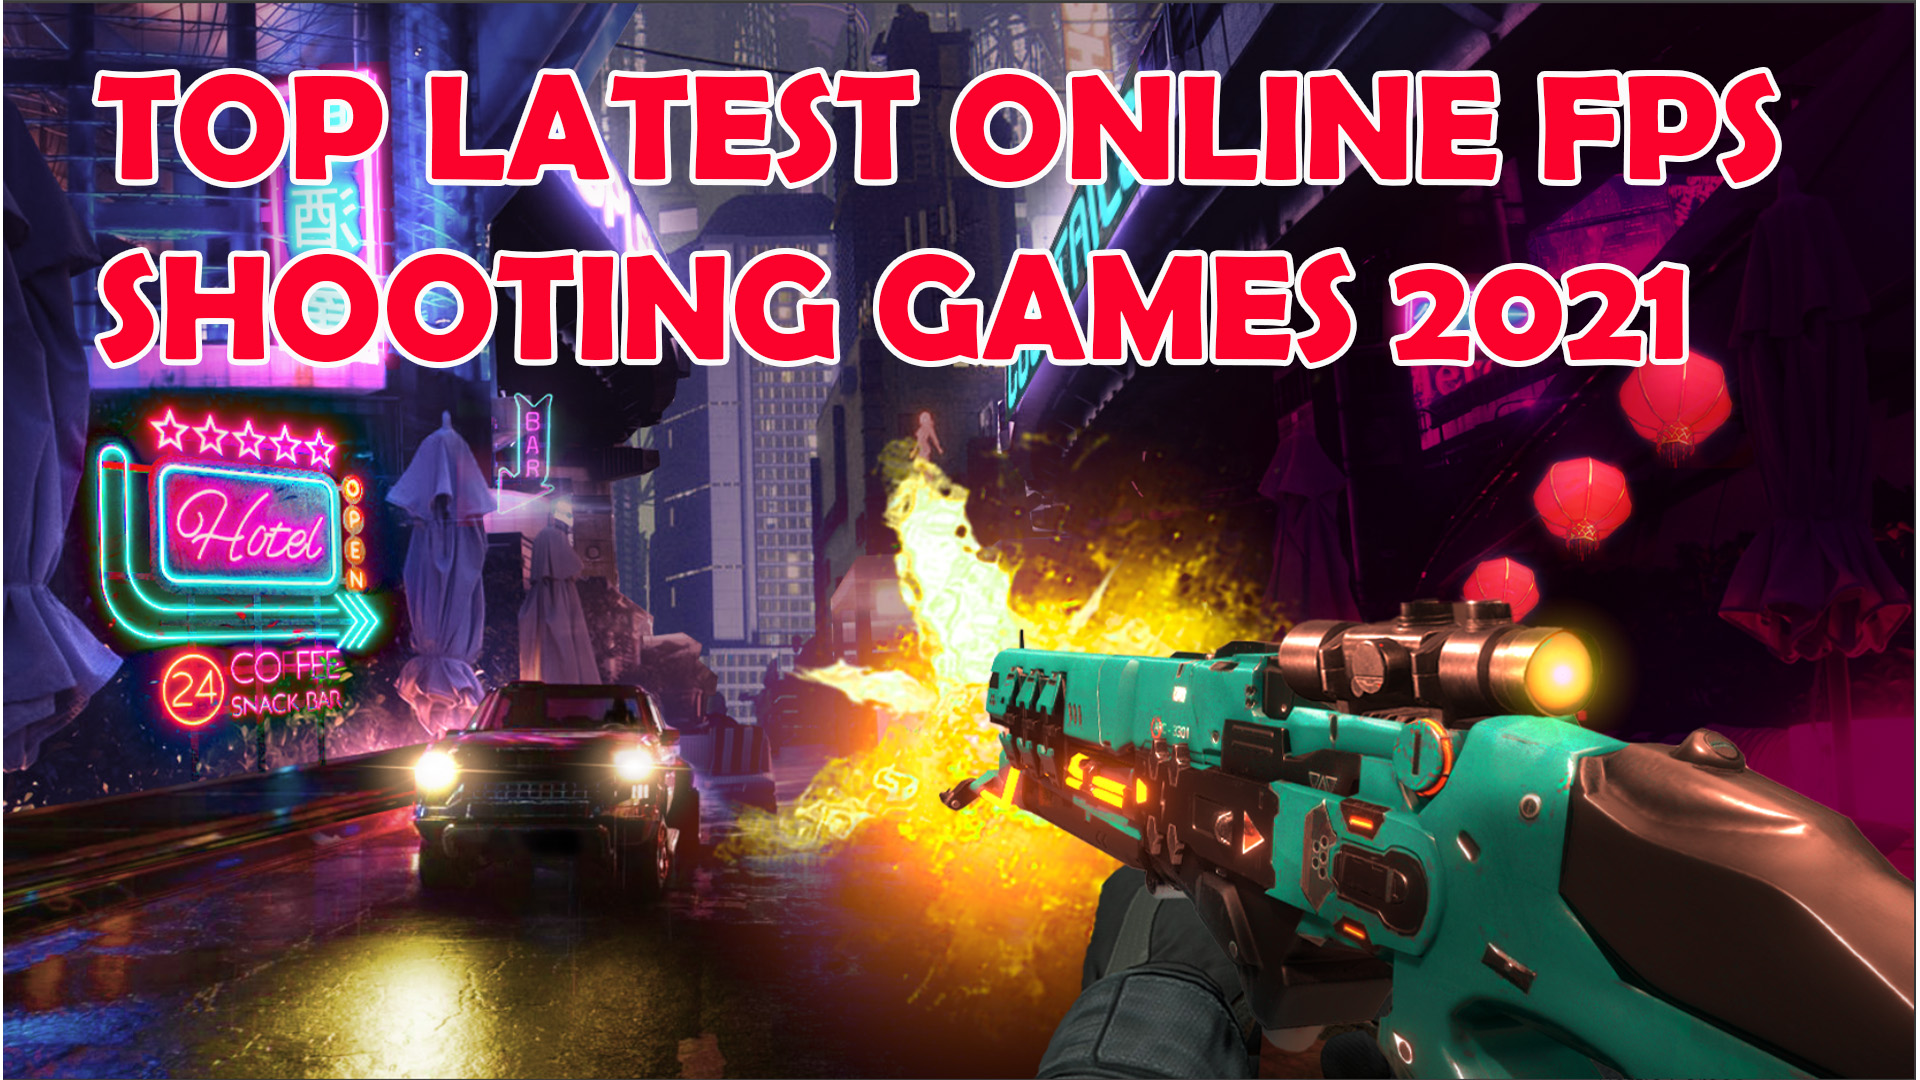 Top Latest Online FPS Shooting Games 2021